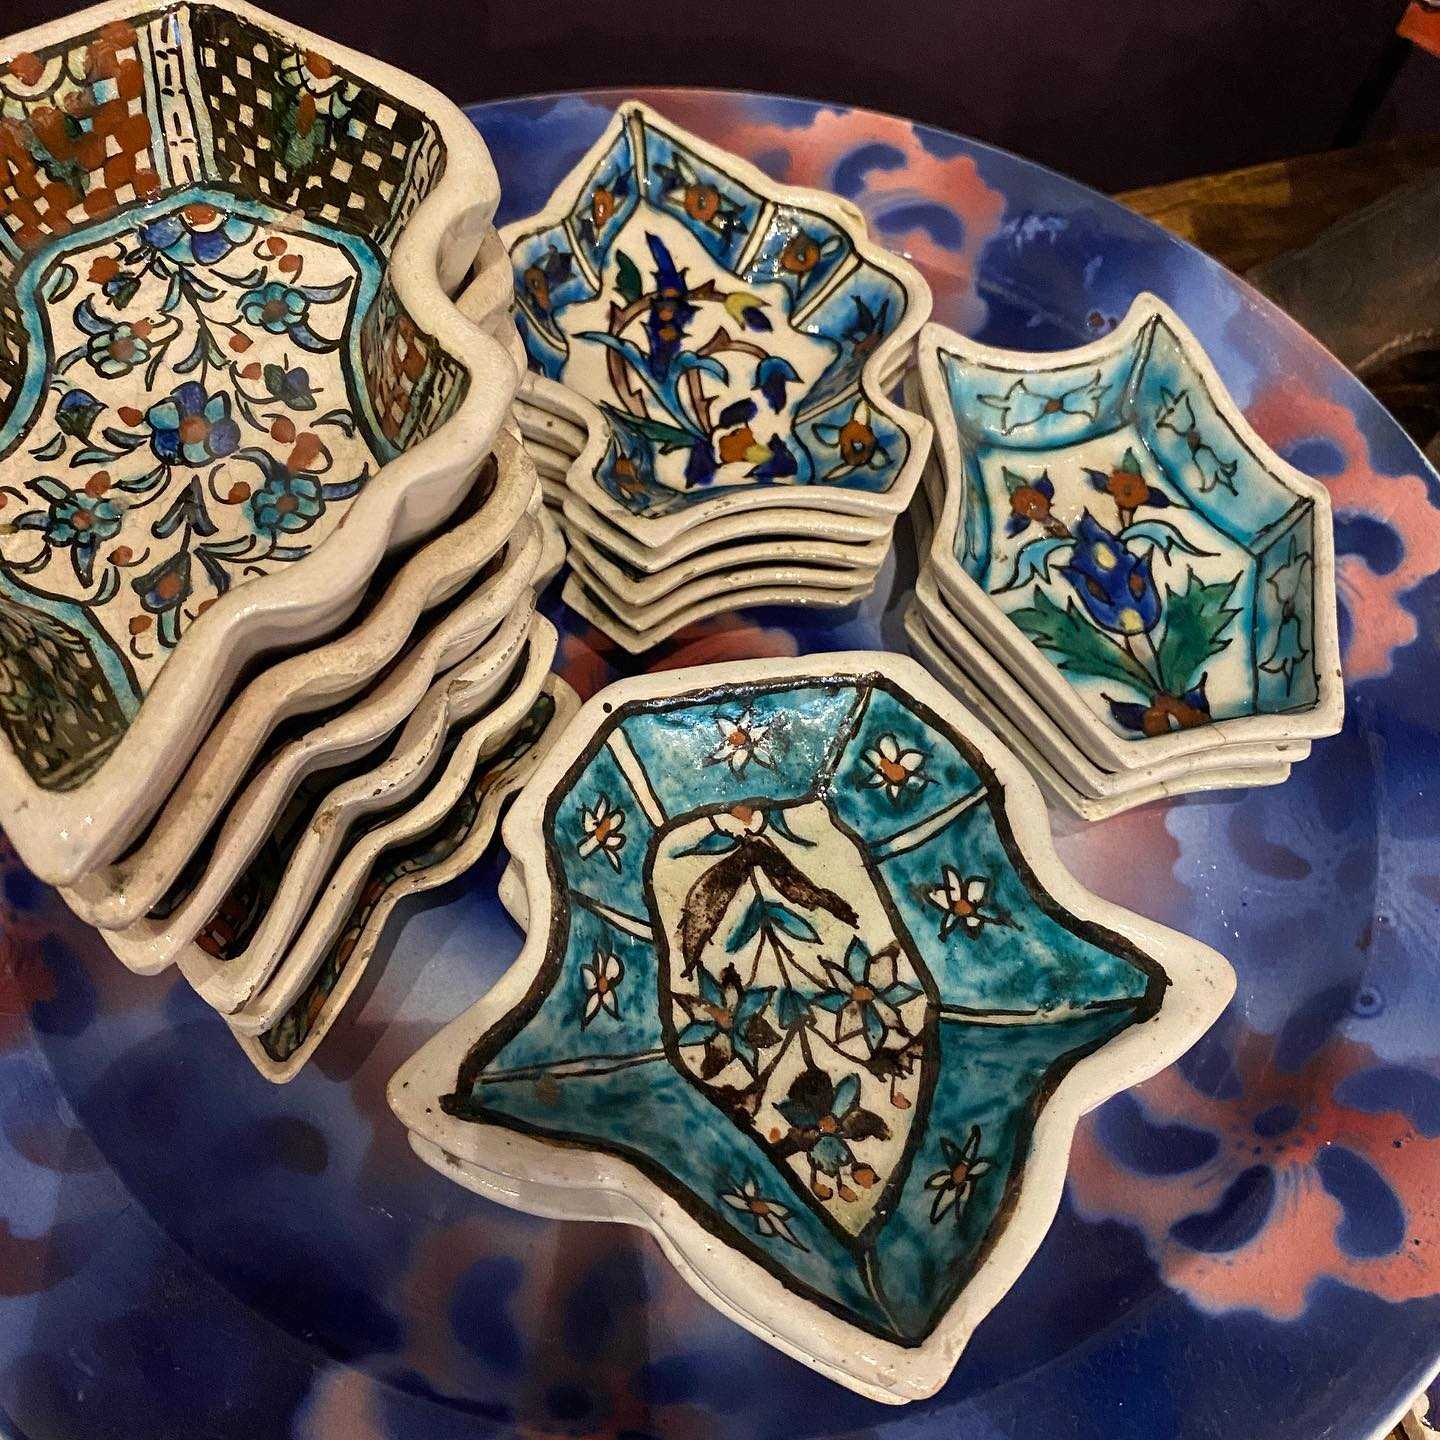 Hand painted serving pieces from Tamam